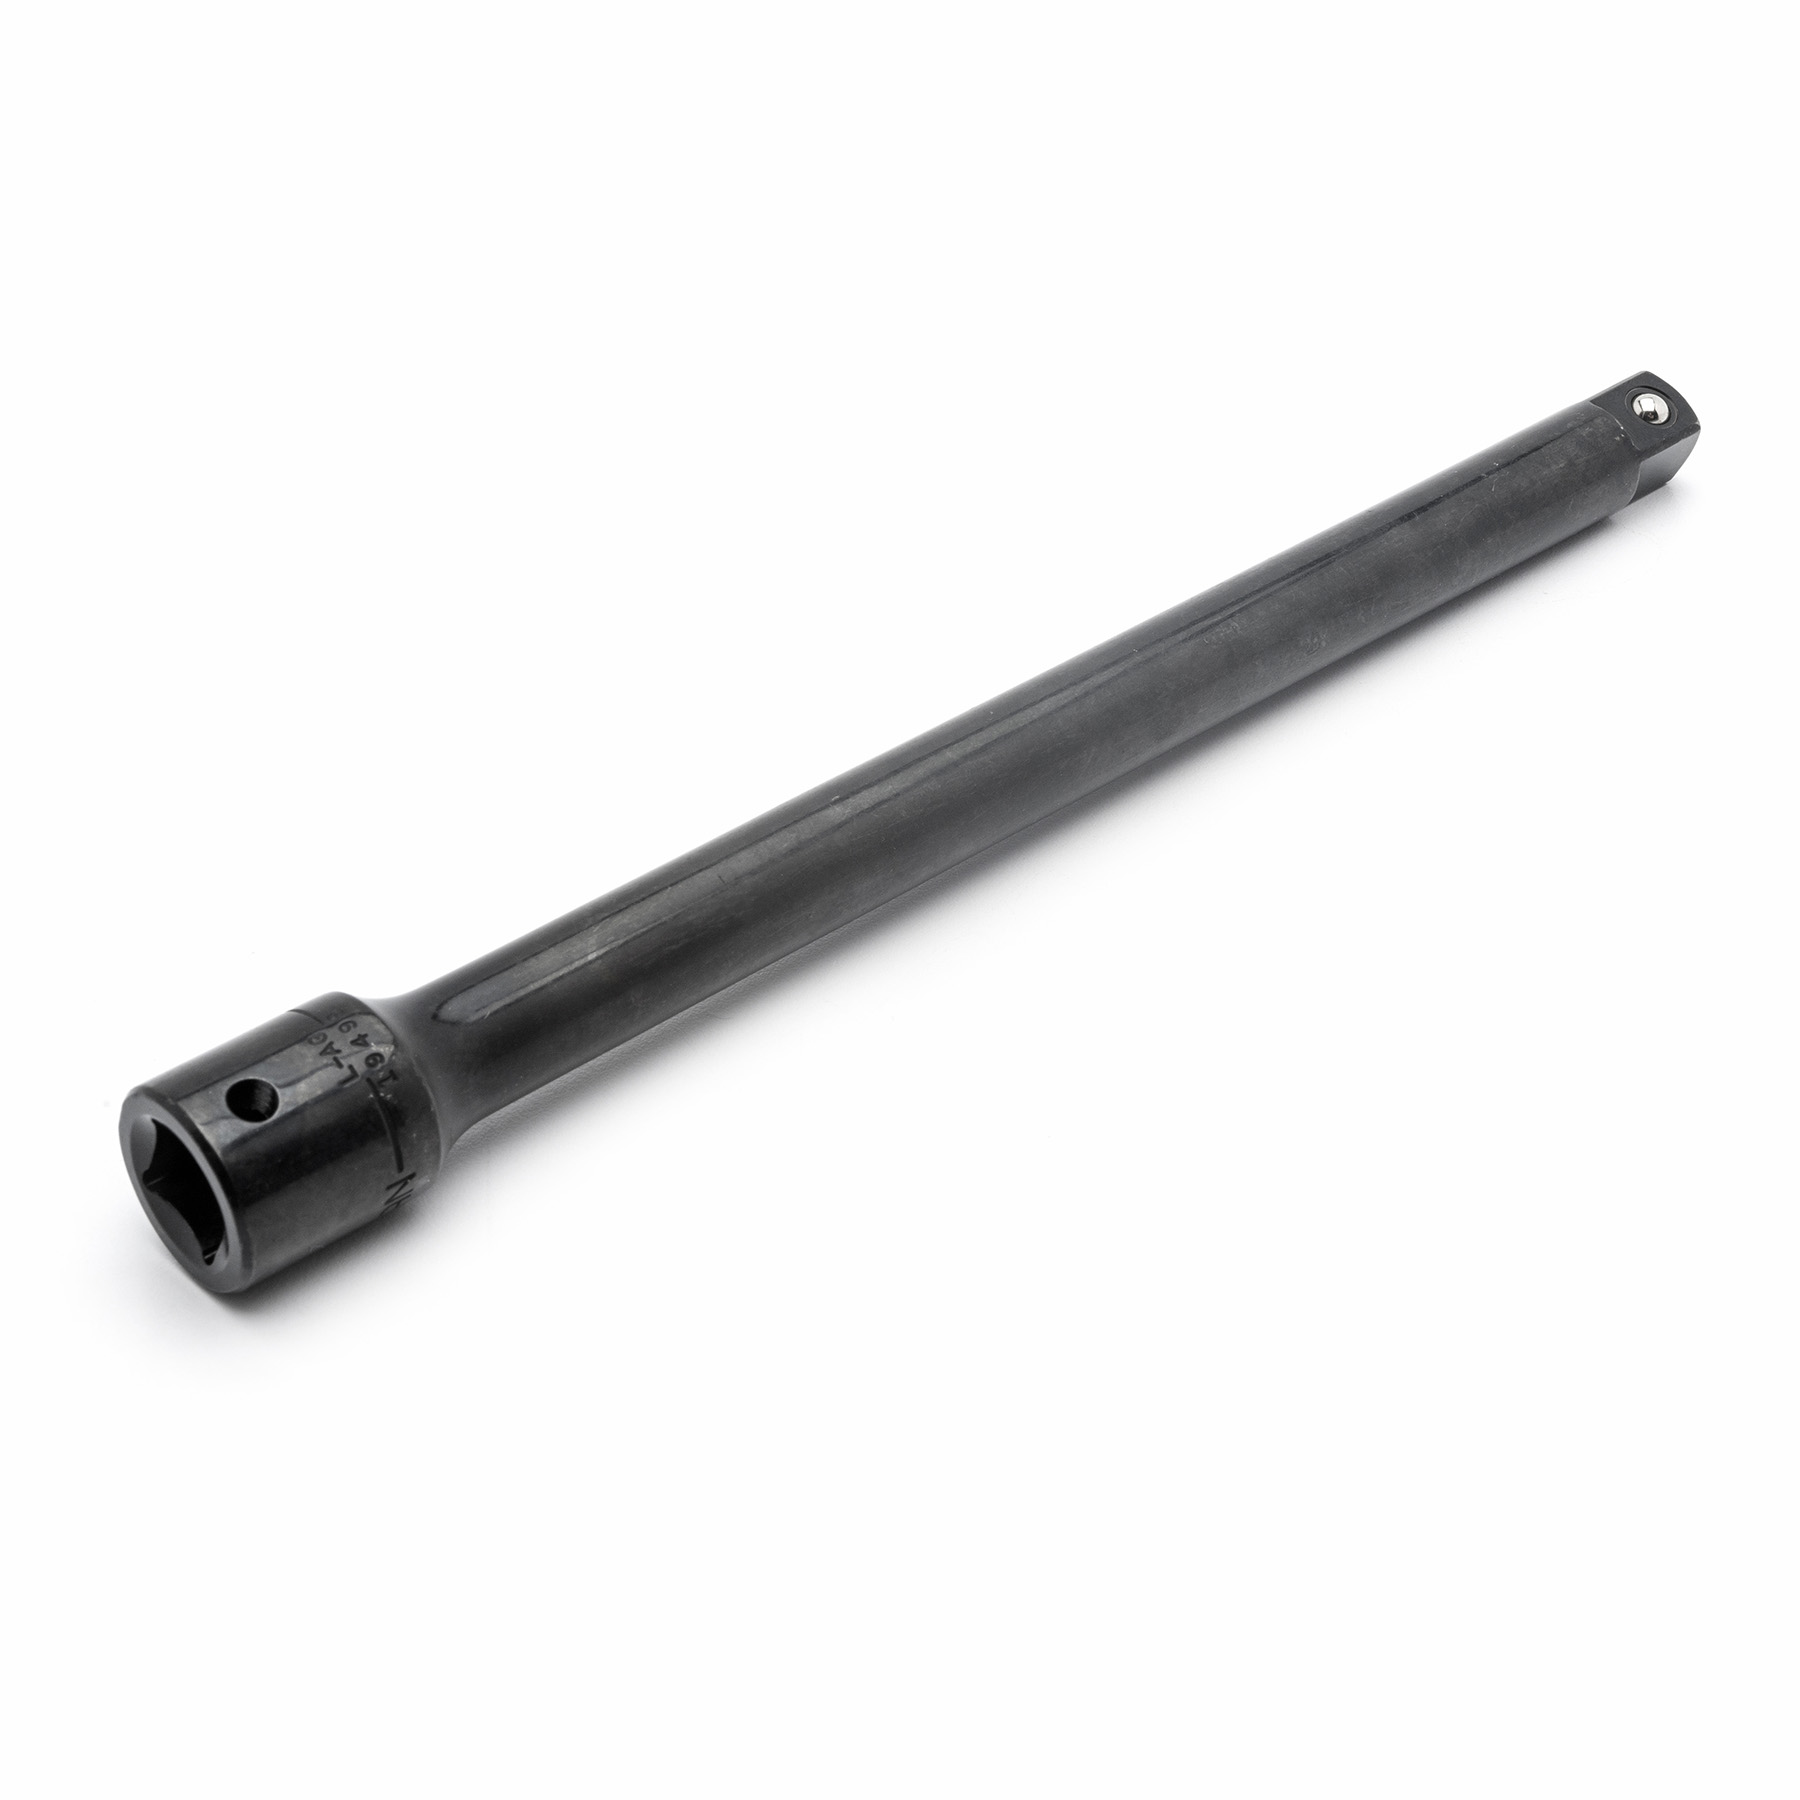 Craftsman 10 in. 1/2 in. Drive Impact Extension Bar